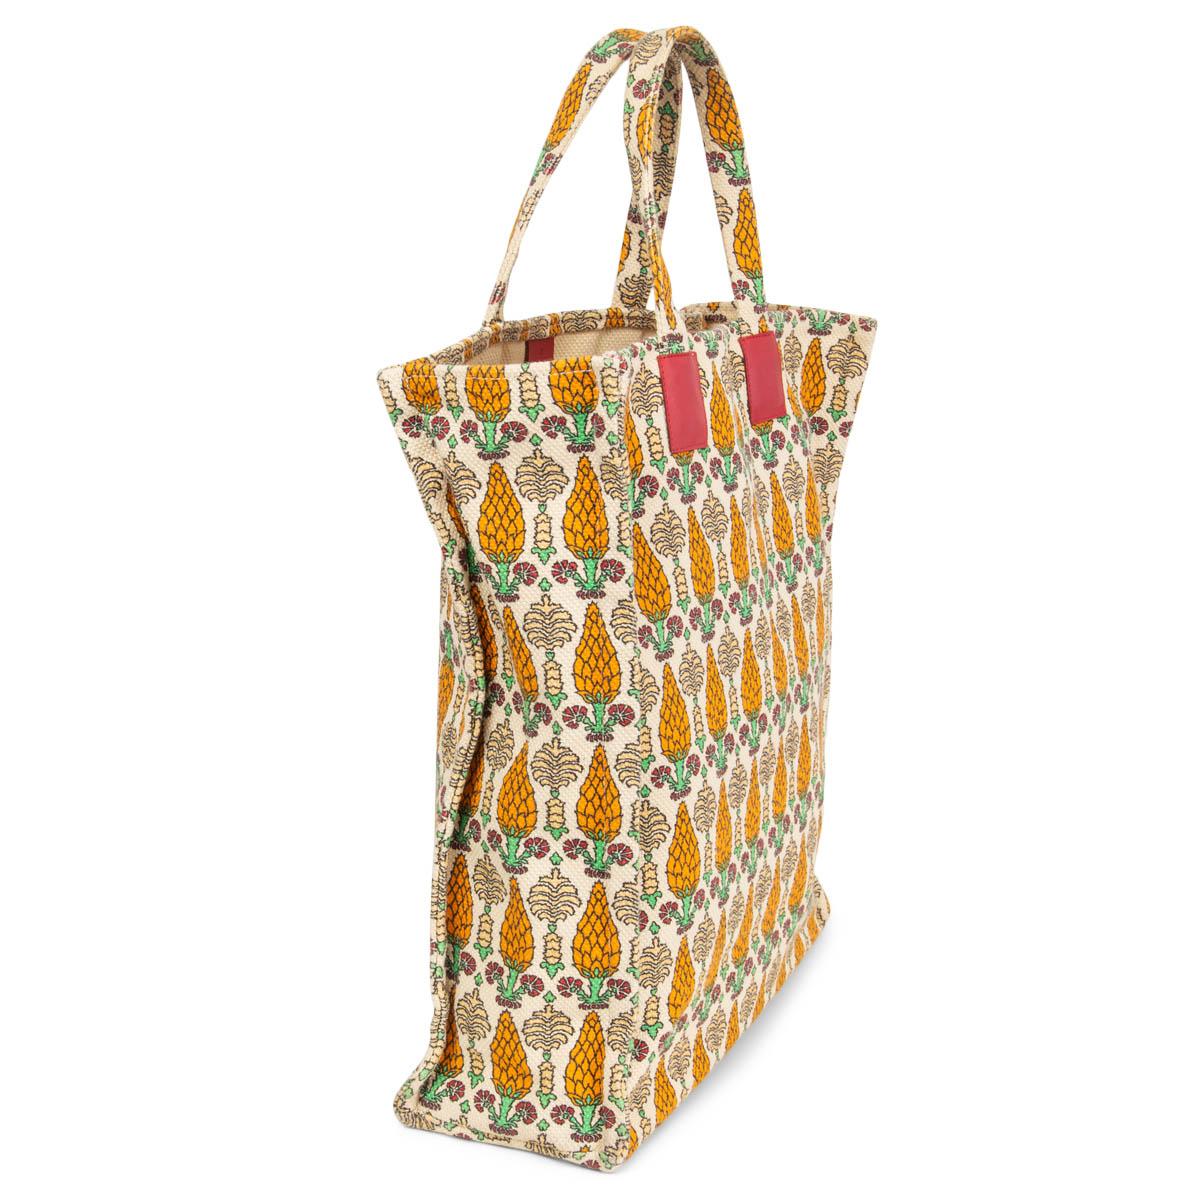 100% authentic Gucci 'Gucci Garden' shopping tote in ivory, orange, burgundy and green Pigna printed canvas. Exclusively sold at the Gucci Garden concept store in Florence. Unlined. Has been carried and shows some wear to the handles. Overall in